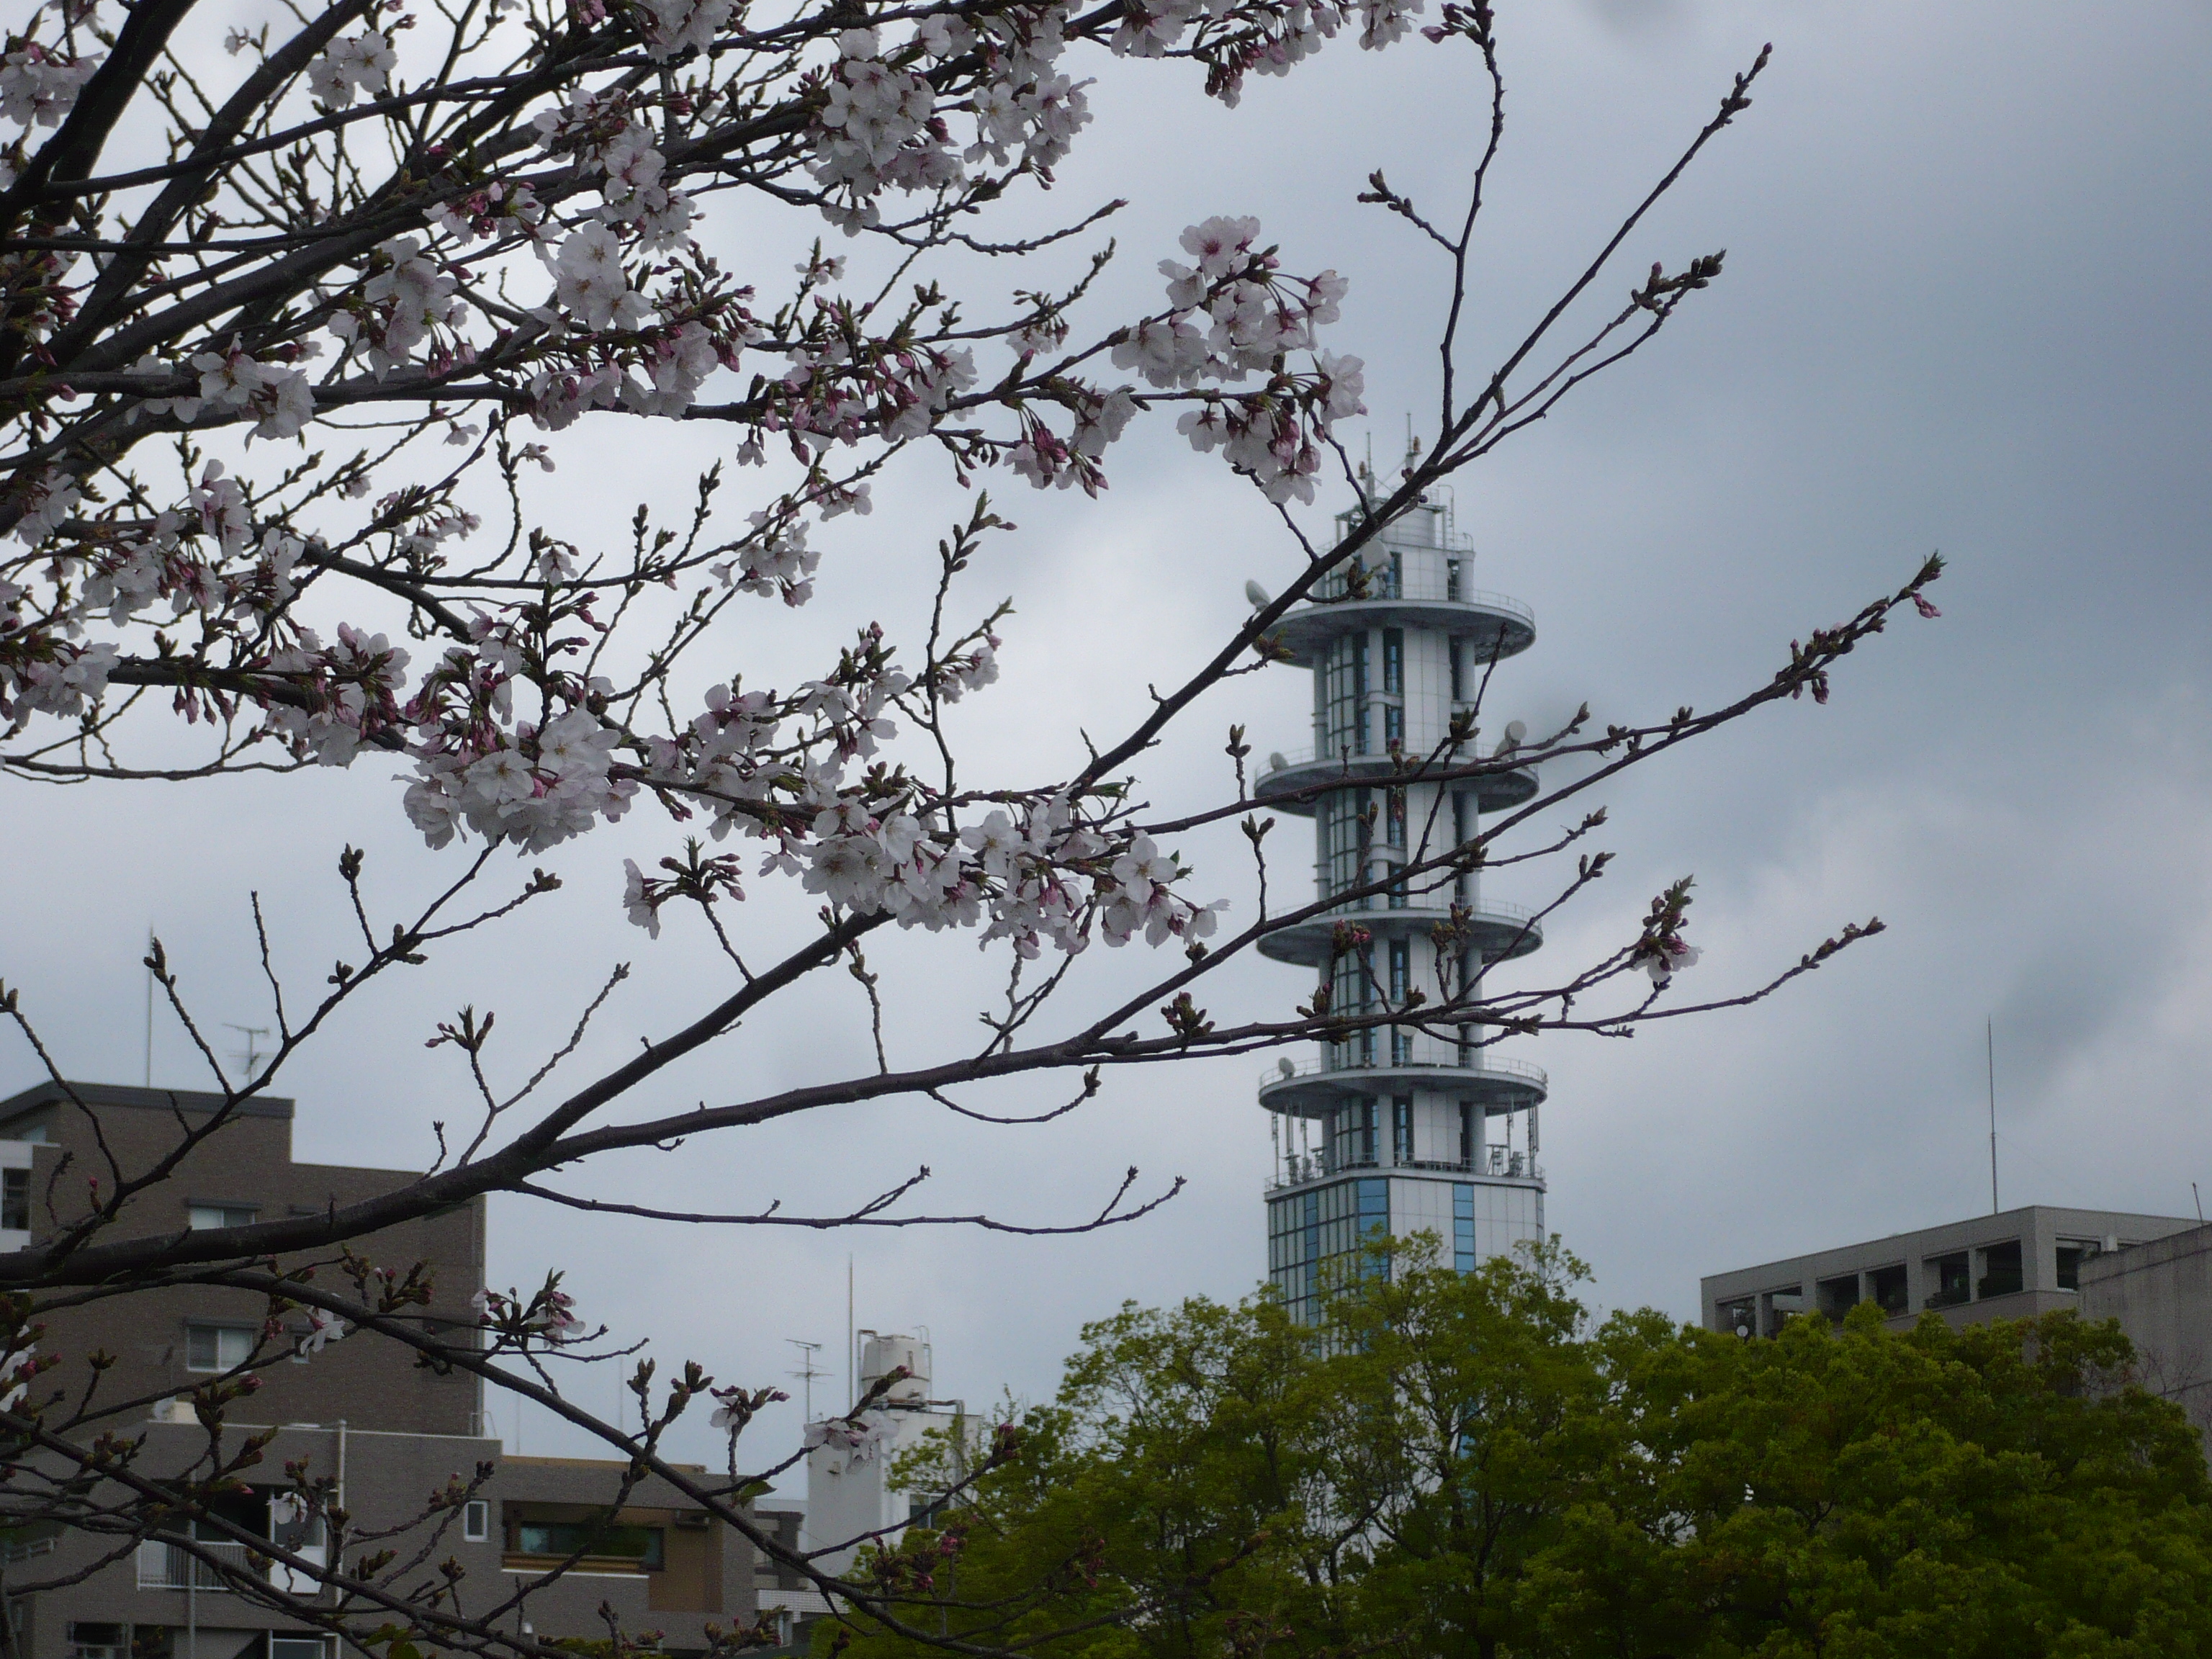 A blossom-covered branch of a sakura (cherry blossom) tree in front of an unusual Jetsons-style building spire in Kagoshima, Japan